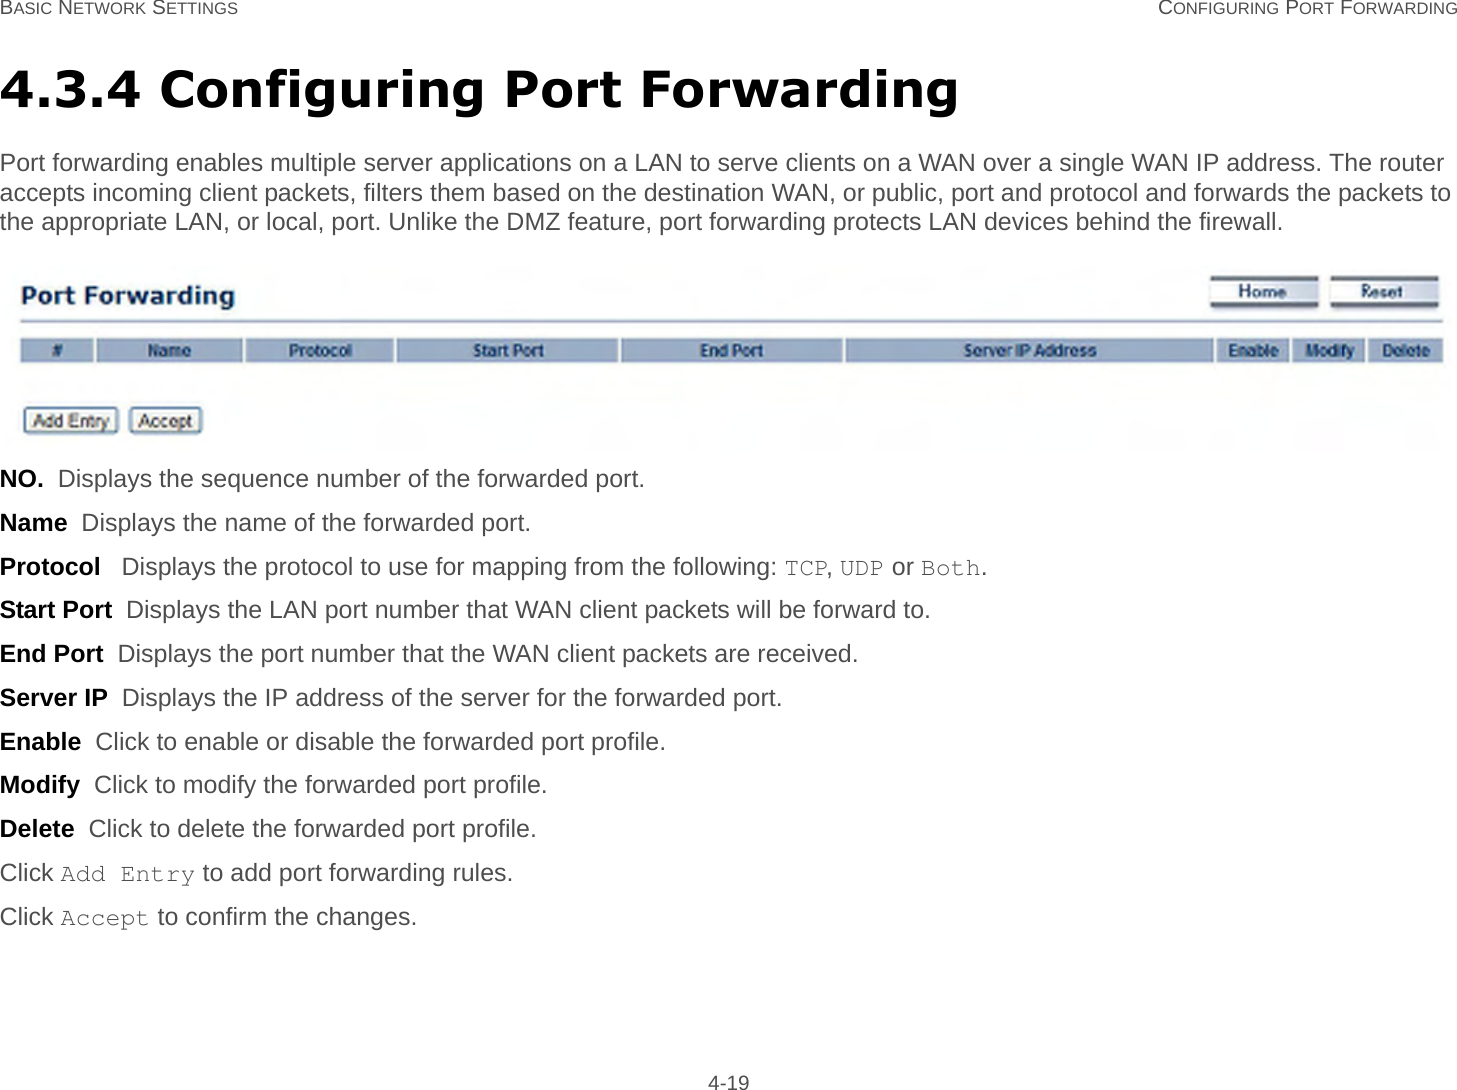 BASIC NETWORK SETTINGS CONFIGURING PORT FORWARDING 4-194.3.4 Configuring Port ForwardingPort forwarding enables multiple server applications on a LAN to serve clients on a WAN over a single WAN IP address. The router accepts incoming client packets, filters them based on the destination WAN, or public, port and protocol and forwards the packets to the appropriate LAN, or local, port. Unlike the DMZ feature, port forwarding protects LAN devices behind the firewall.NO.  Displays the sequence number of the forwarded port.Name  Displays the name of the forwarded port.Protocol   Displays the protocol to use for mapping from the following: TCP, UDP or Both.Start Port  Displays the LAN port number that WAN client packets will be forward to.End Port  Displays the port number that the WAN client packets are received.Server IP  Displays the IP address of the server for the forwarded port.Enable  Click to enable or disable the forwarded port profile.Modify  Click to modify the forwarded port profile.Delete  Click to delete the forwarded port profile.Click Add Entry to add port forwarding rules.Click Accept to confirm the changes.